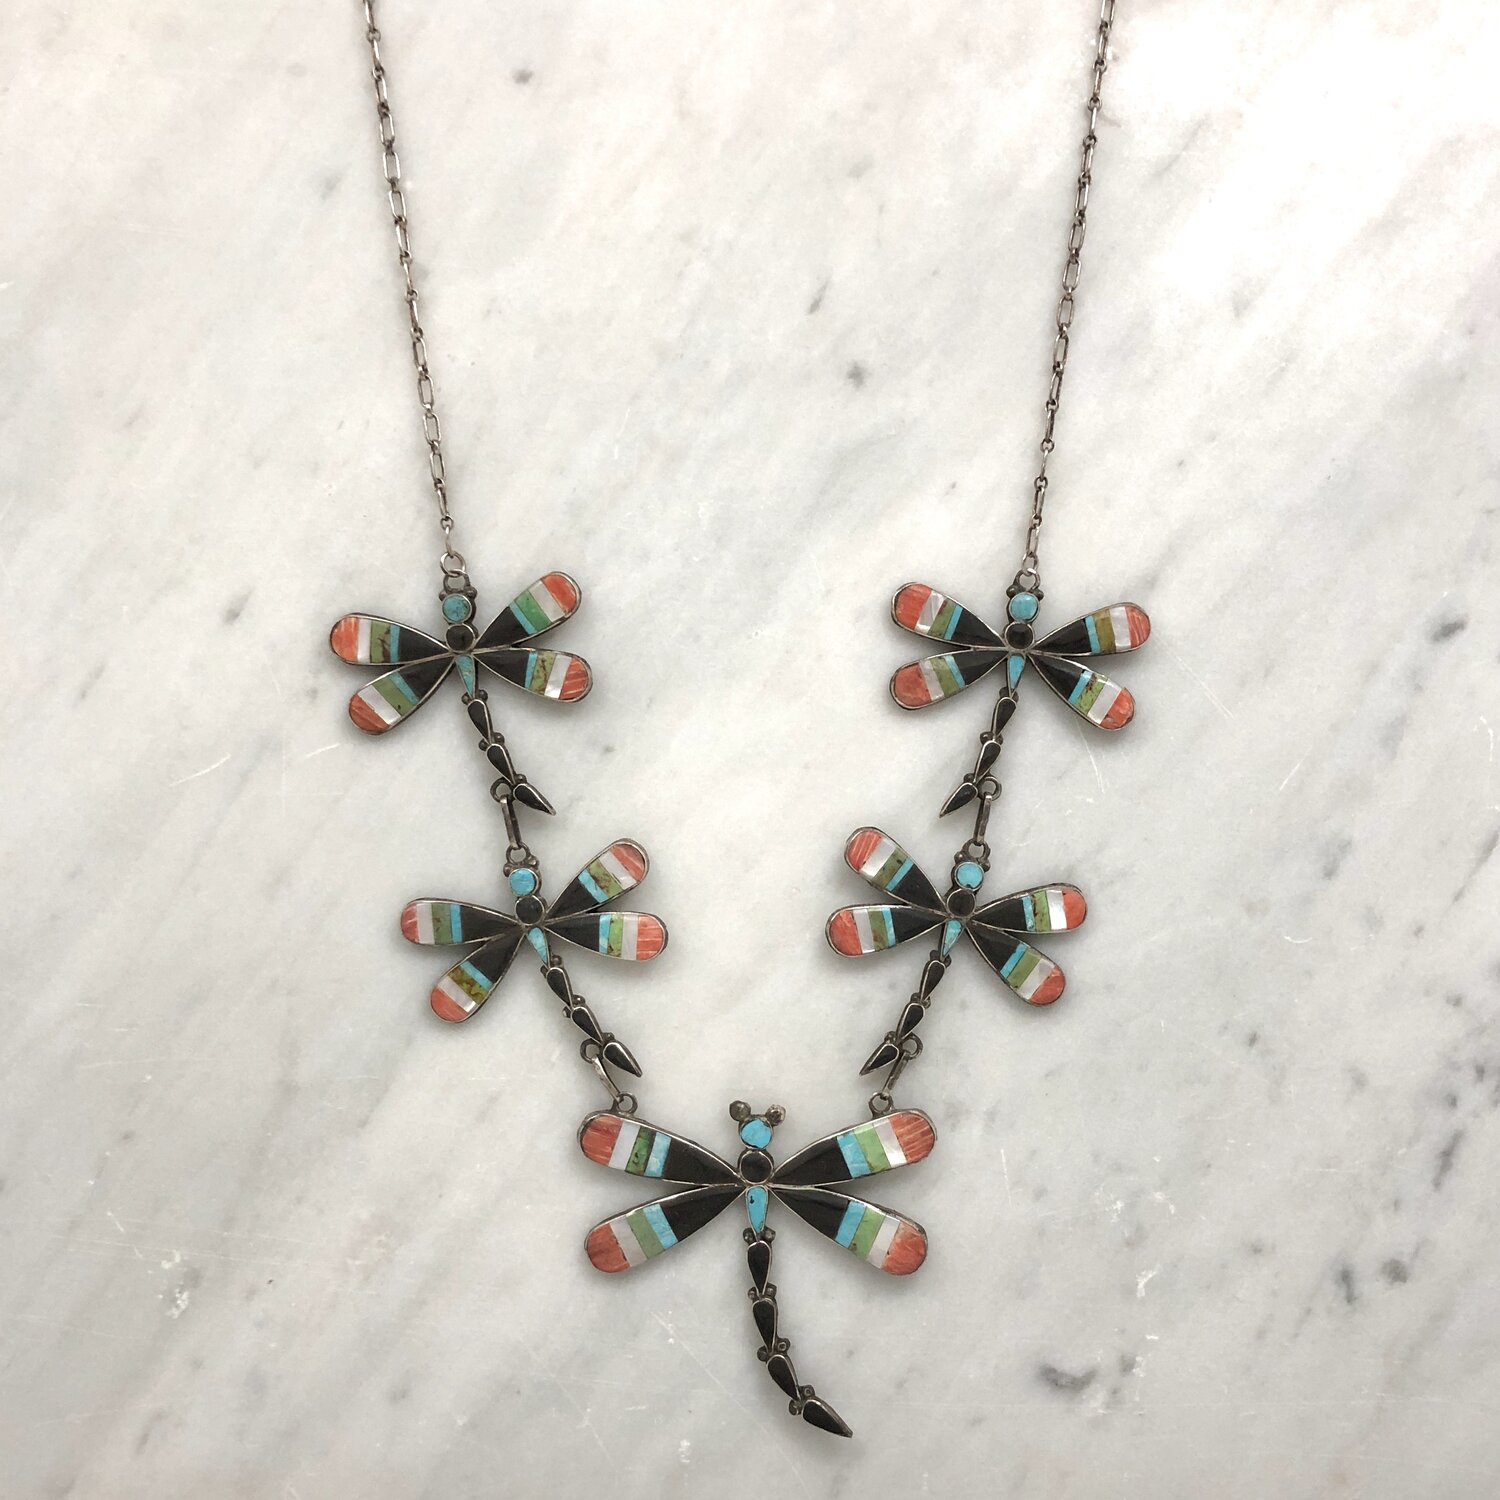 Vintage Zuni Multi Stone Inlay Dragonfly Necklace — Worn-Over-Time